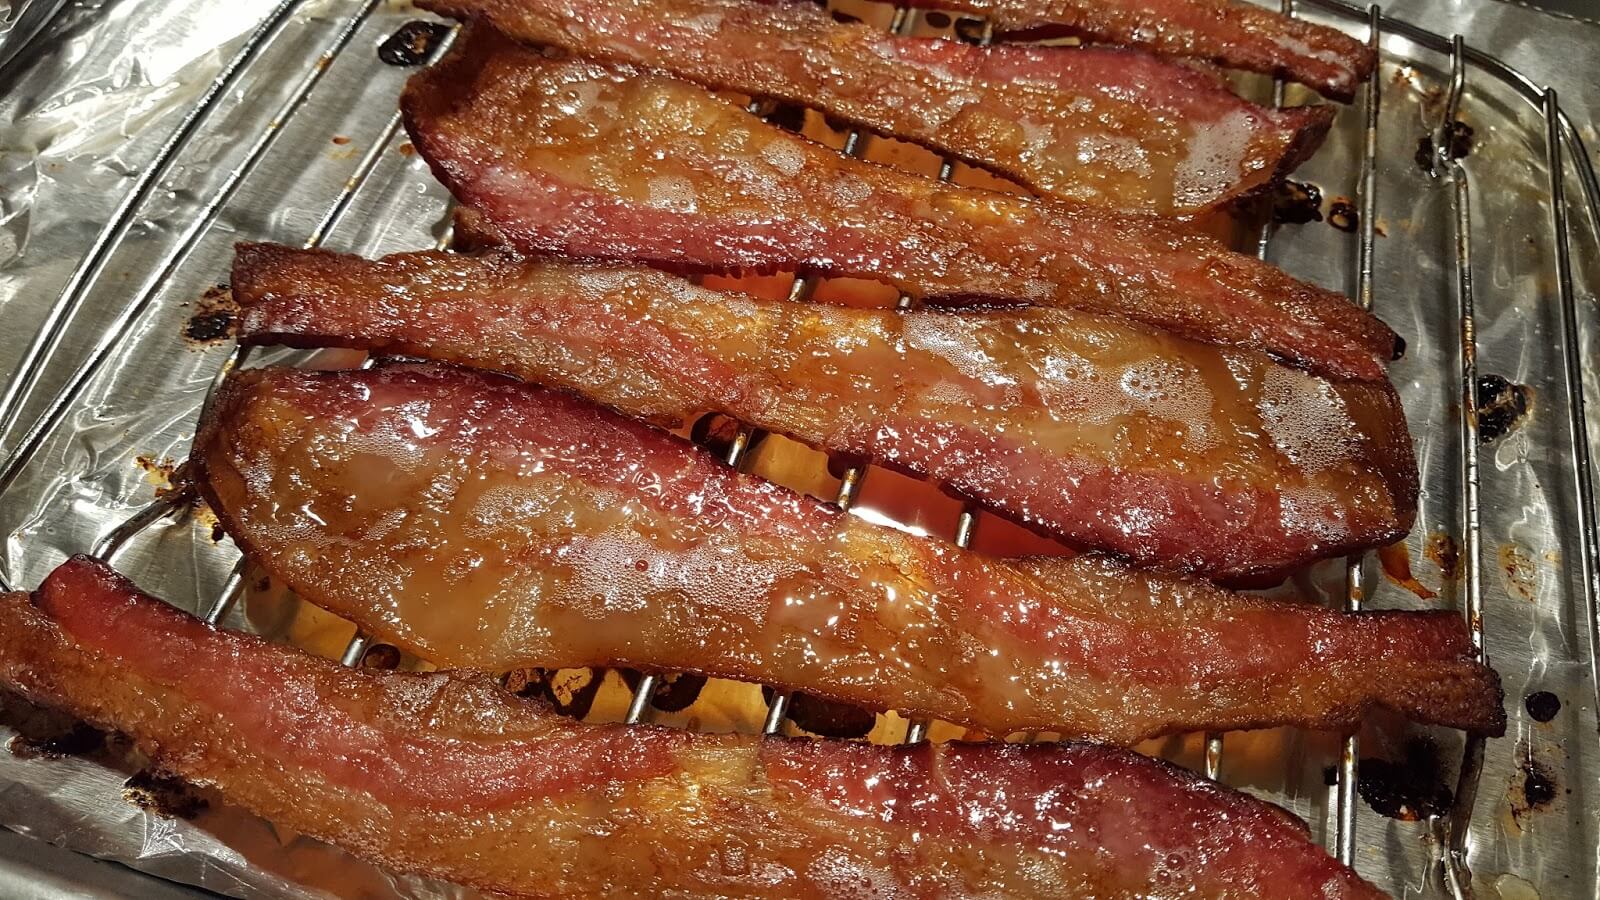 Awesome oven cooked bacon